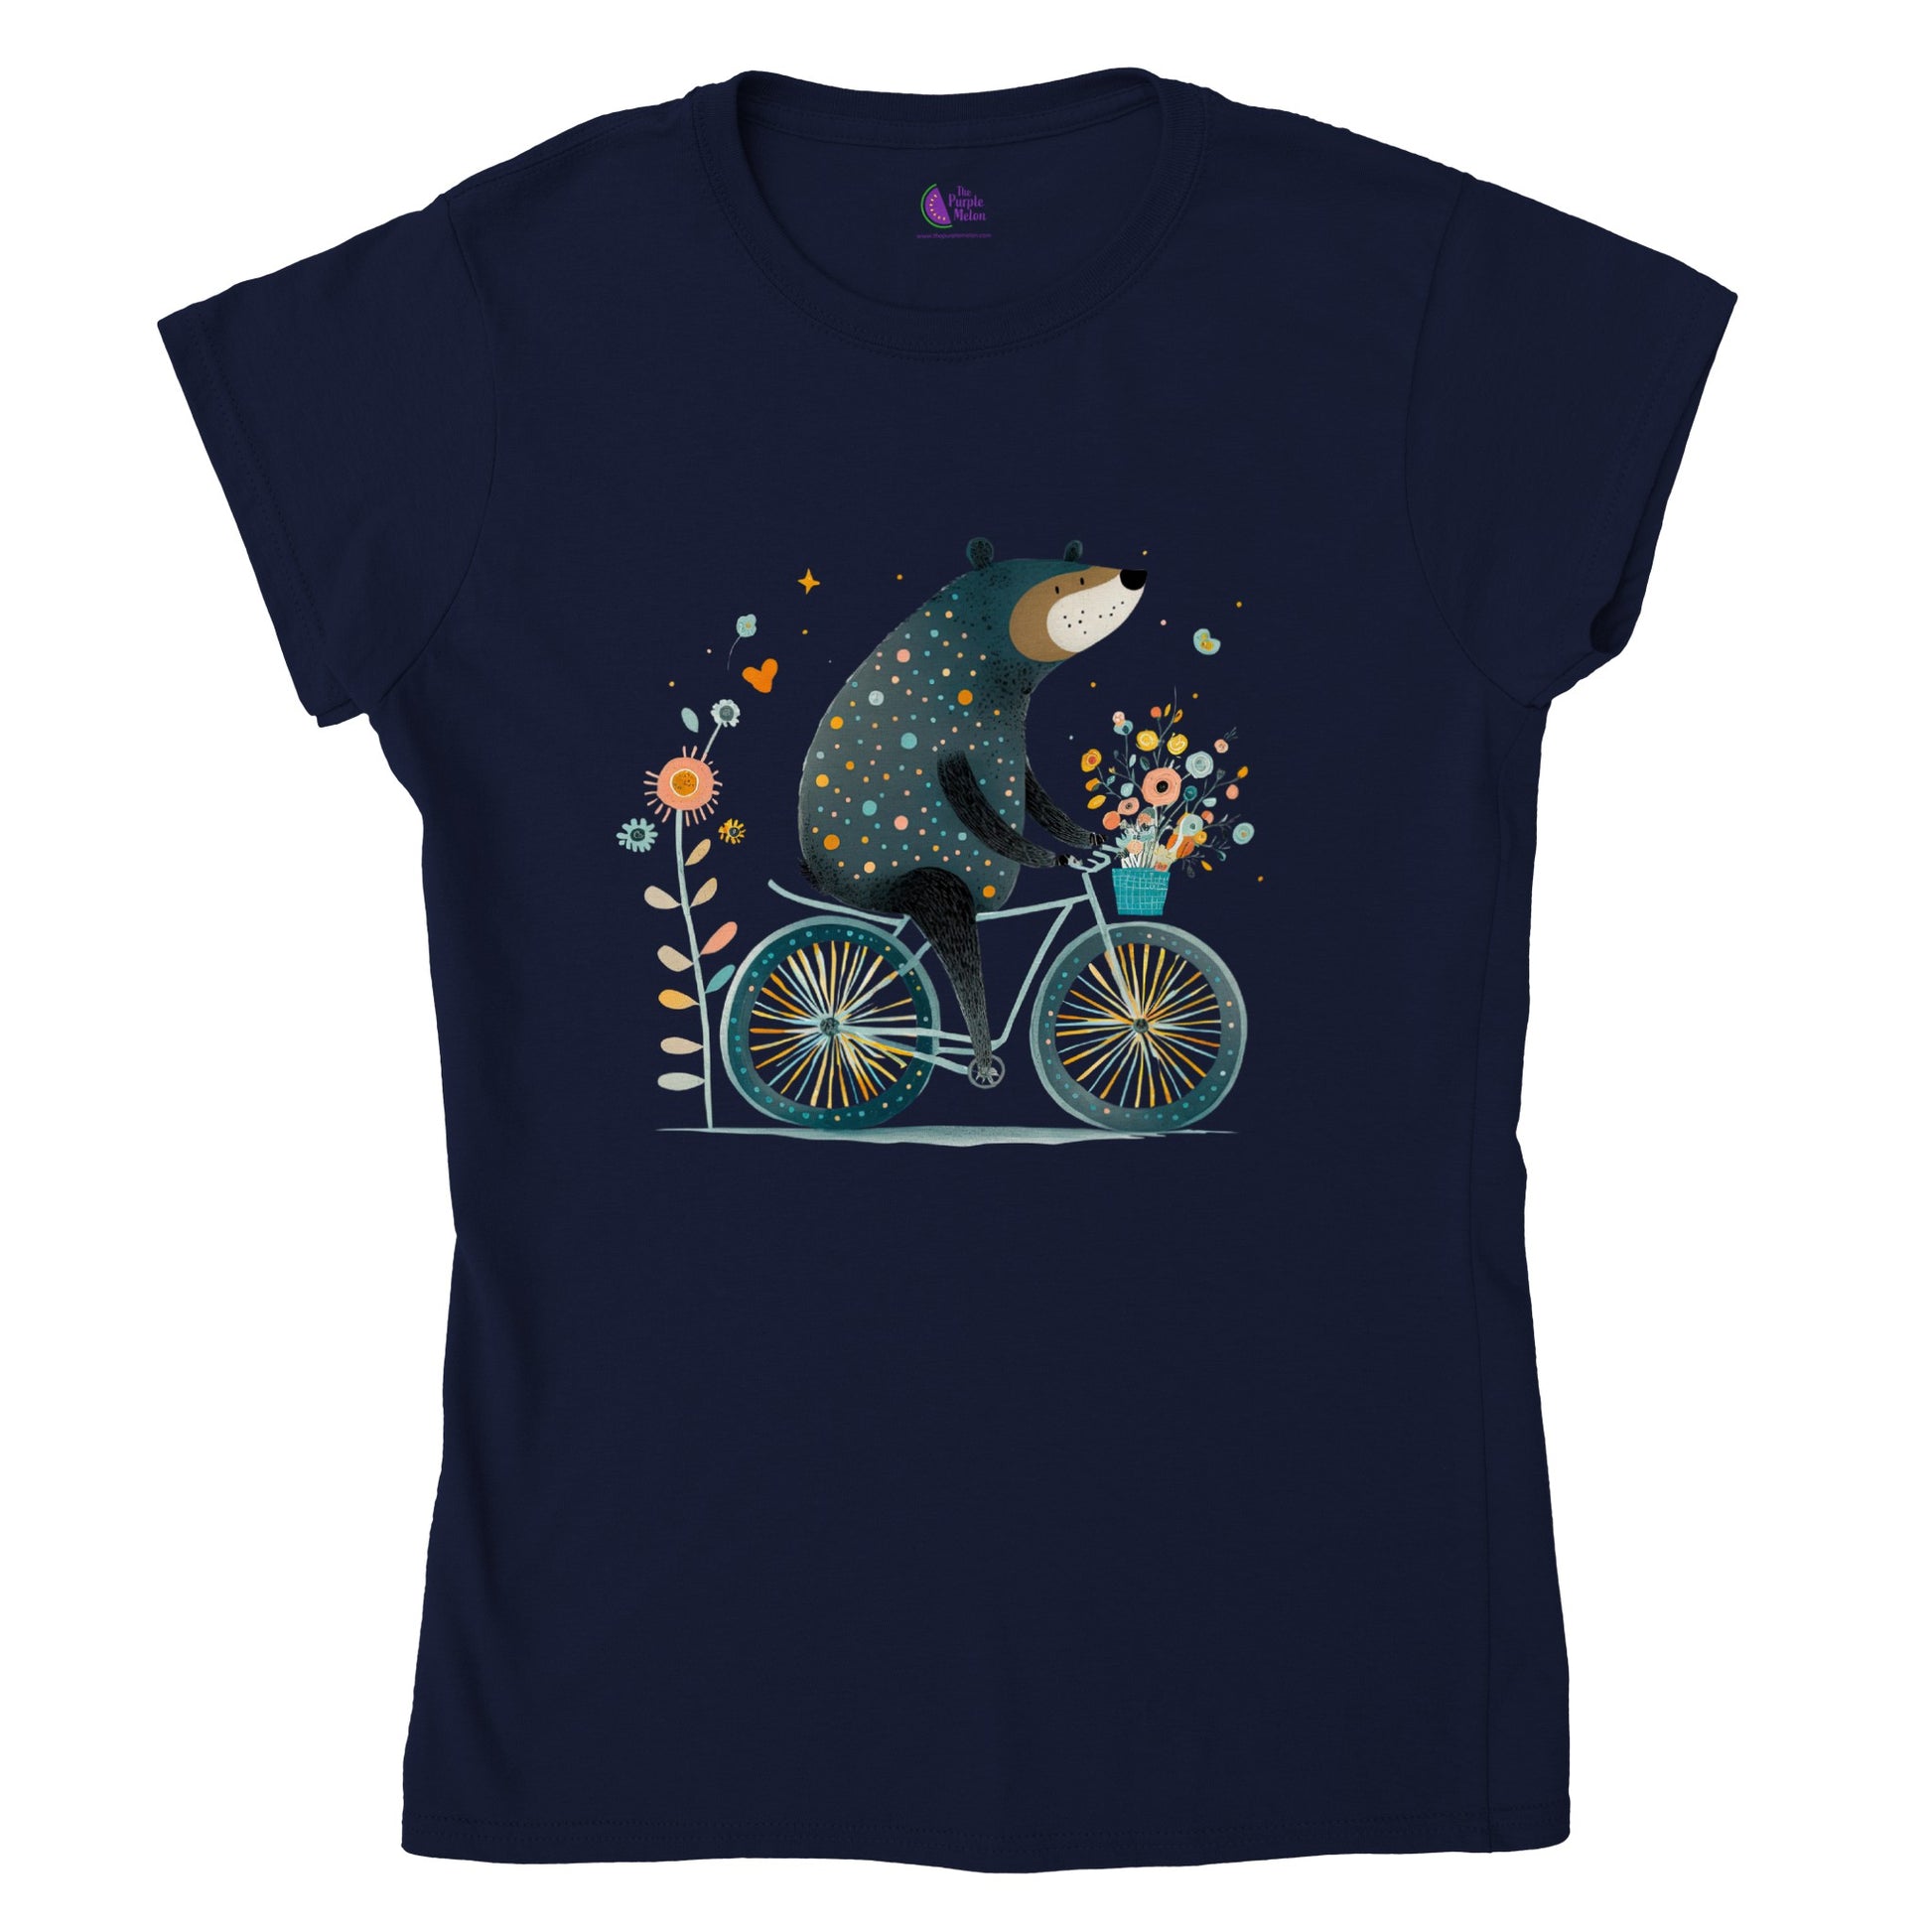 A navy t-shirt with a cute bear riding a bicycle with a basket of flowers print